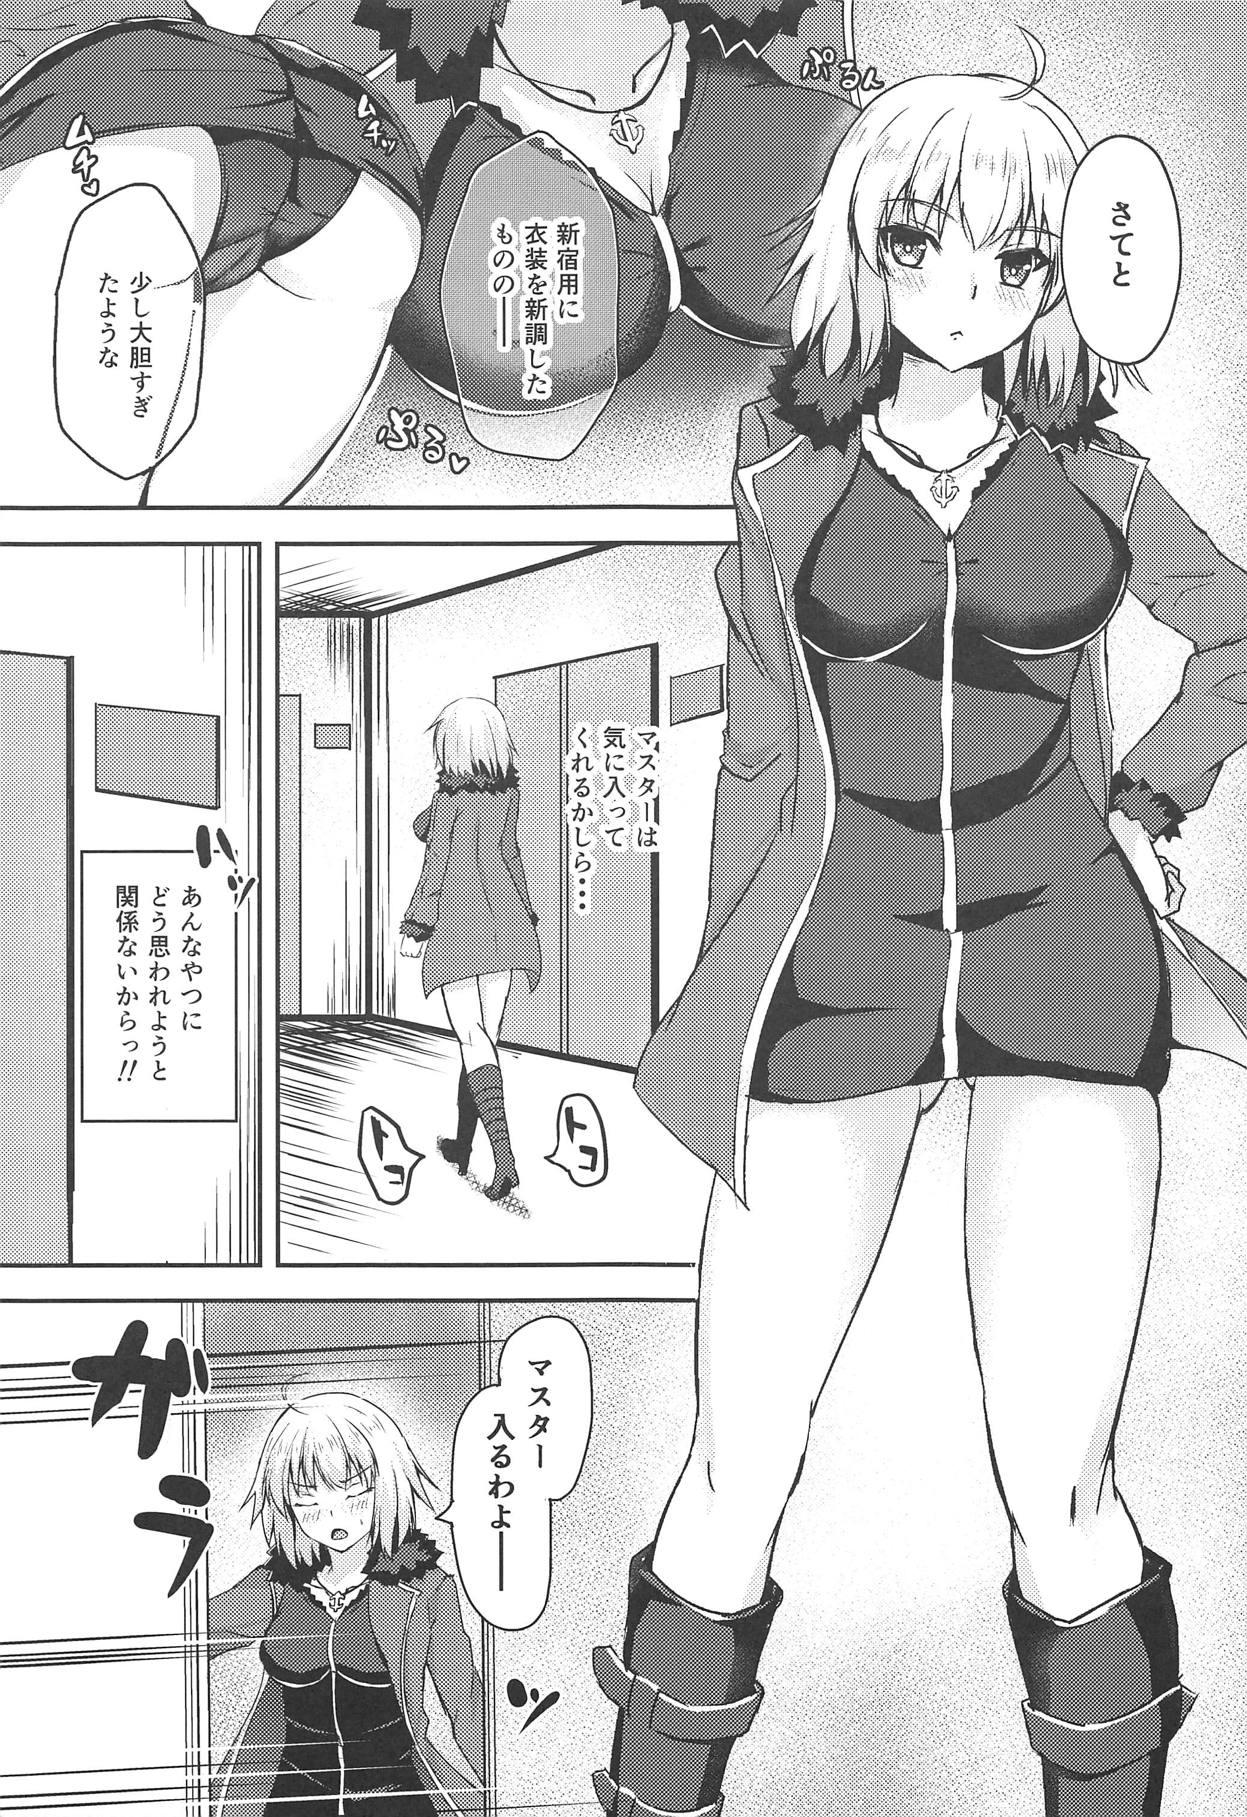 Old Man Jeanne Alter to Ecchi Shitai!! - Fate grand order Celebrities - Page 3